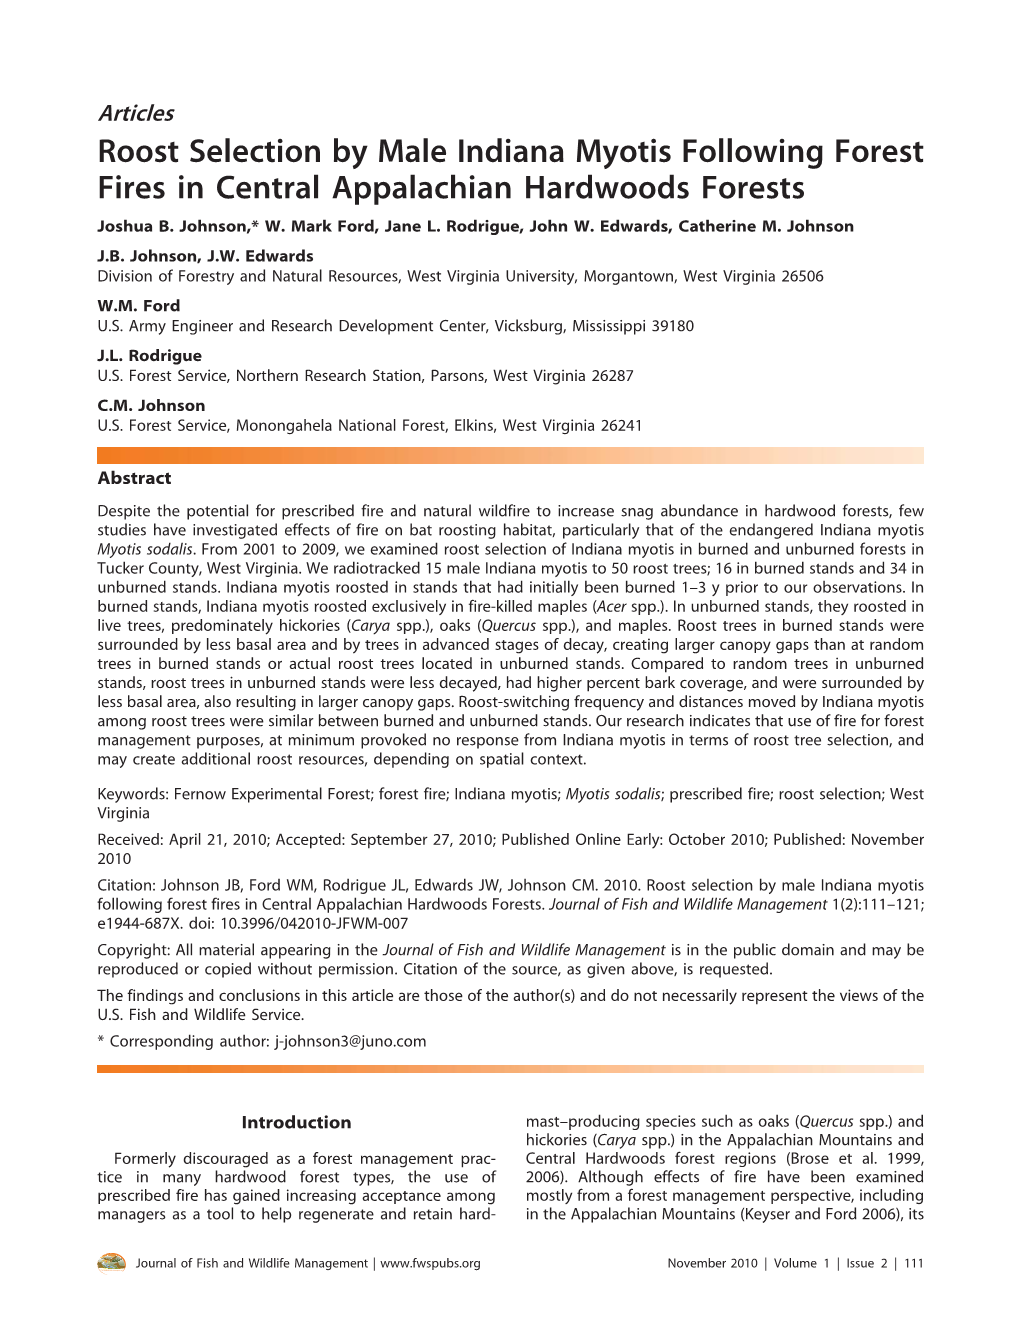 Roost Selection by Male Indiana Myotis Following Forest Fires in Central Appalachian Hardwoods Forests Joshua B